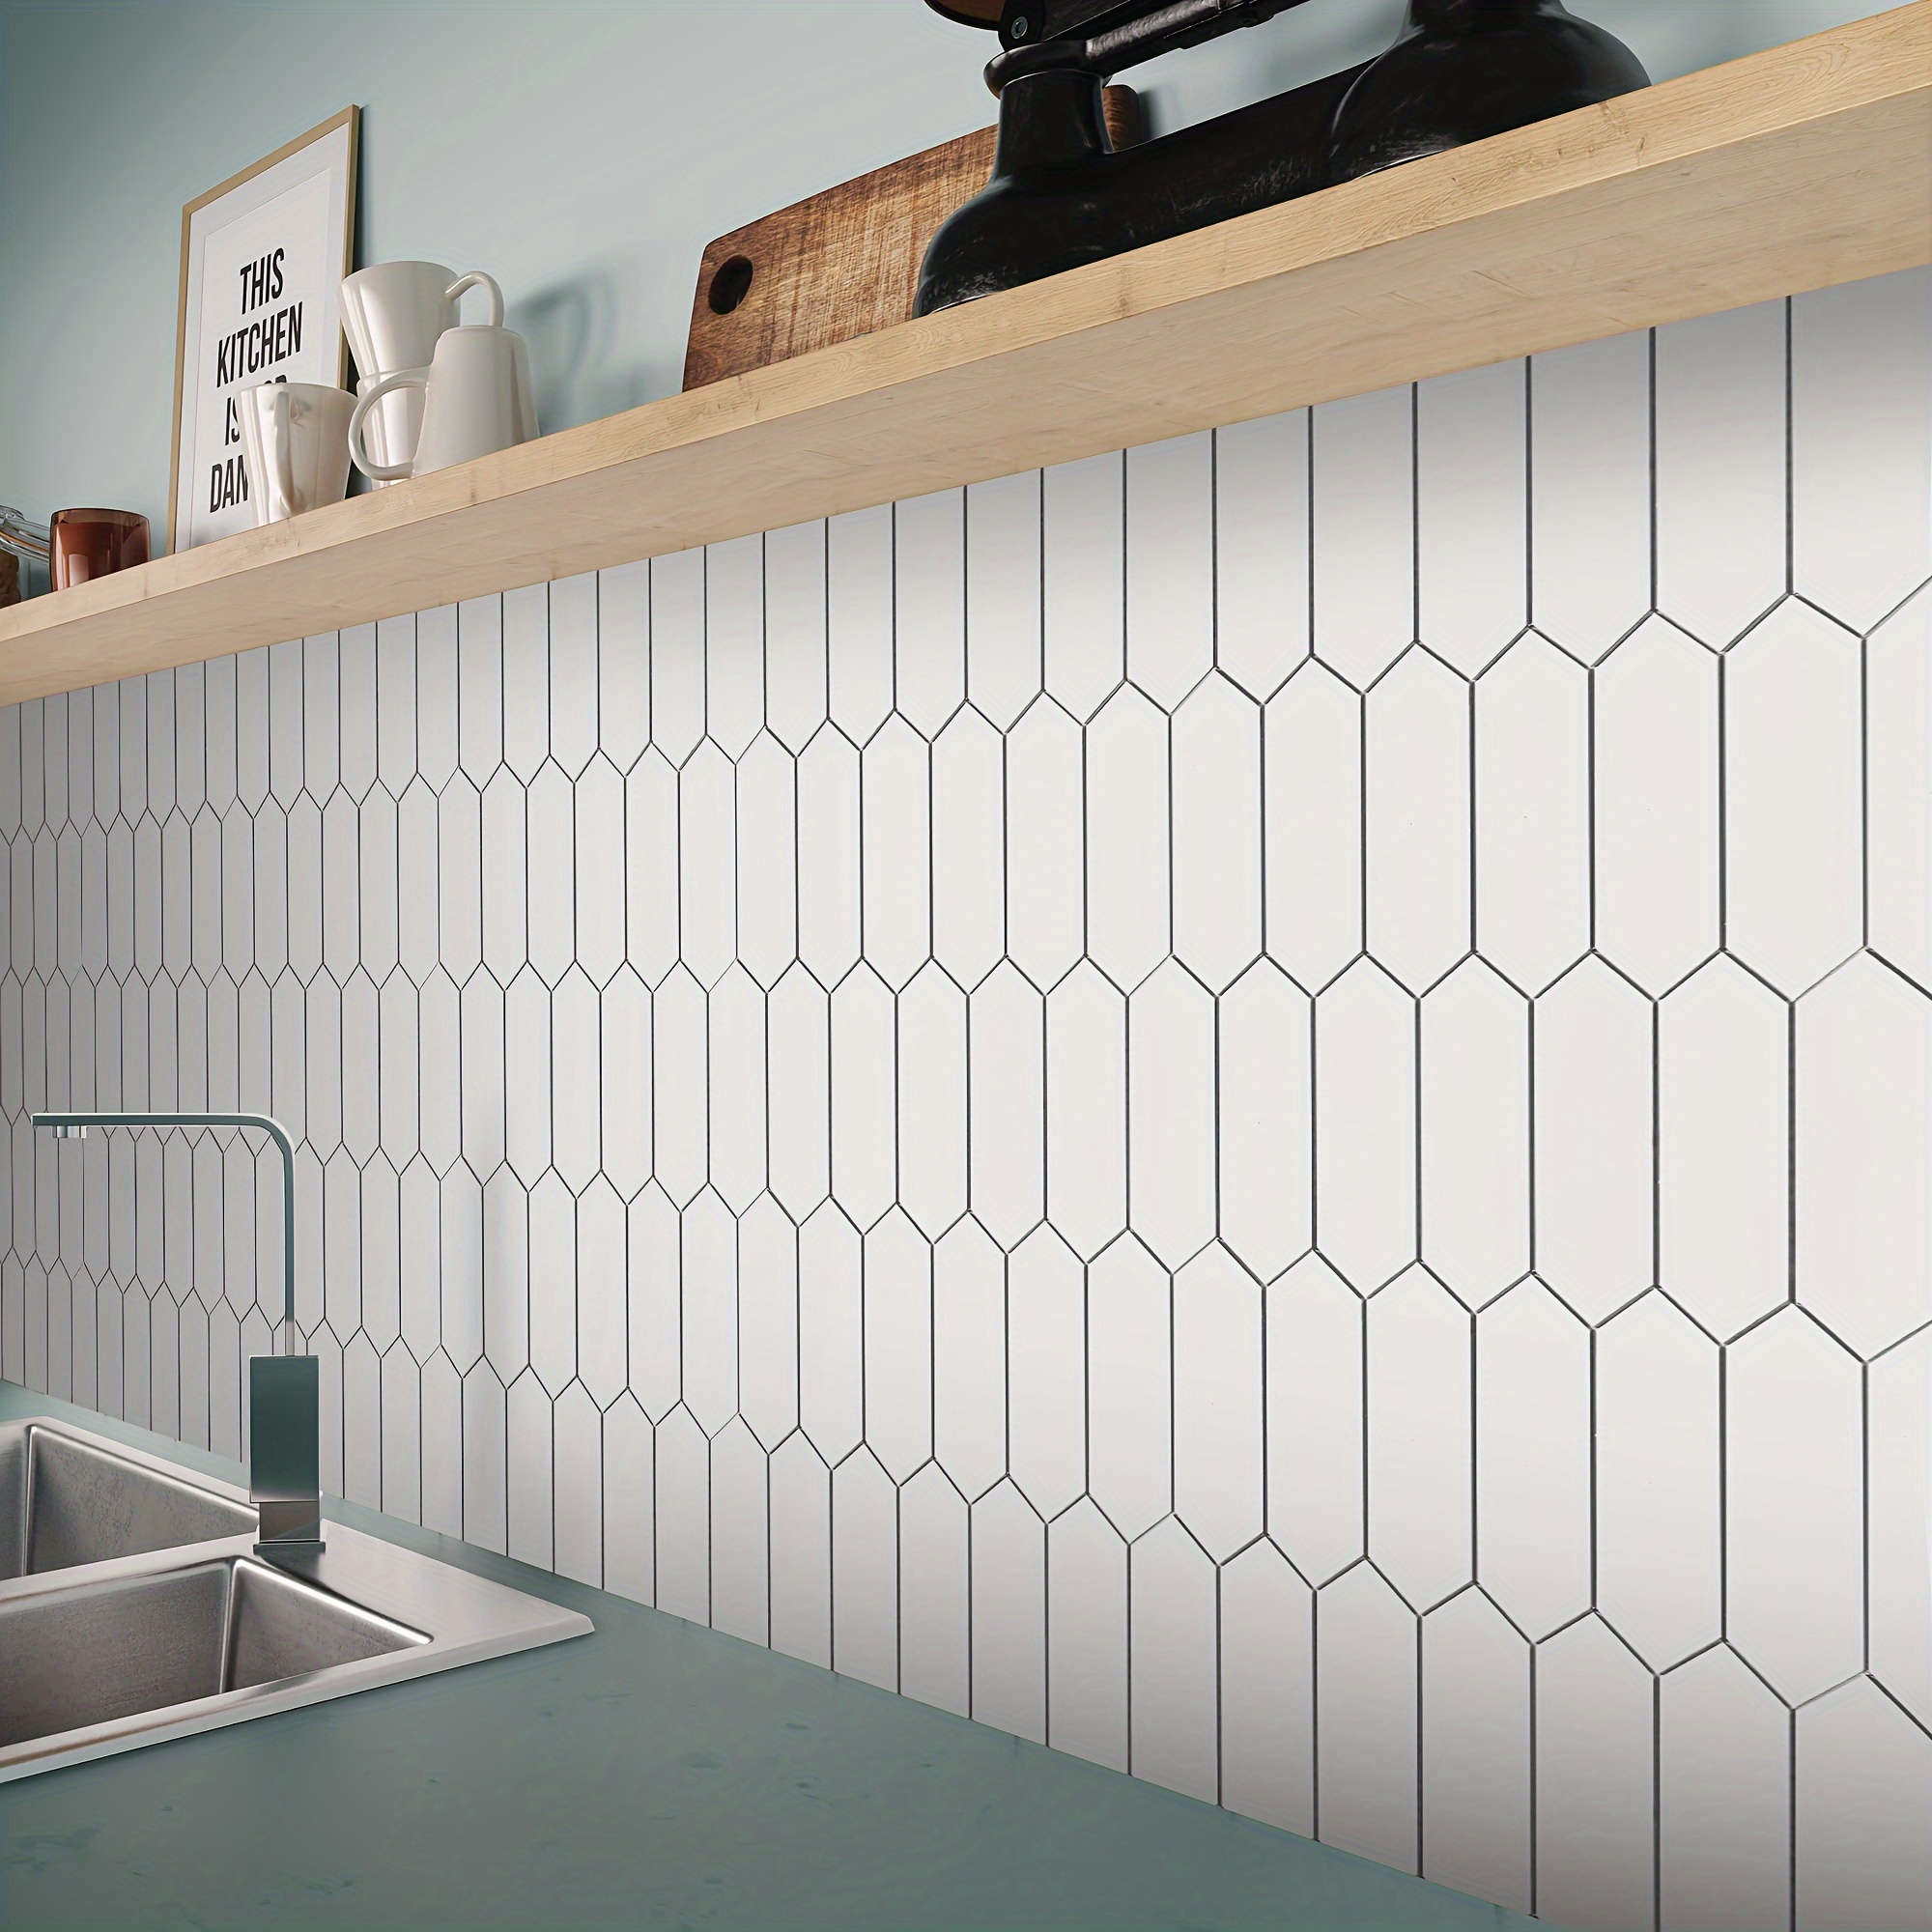 

10-piece Peel And Stick Backsplash Wall Tile For Kitchen Bathroom 12 In. X 11.22 In. Long Hexagon Stone Composite Self Adhesive Mosaic Tiles, White